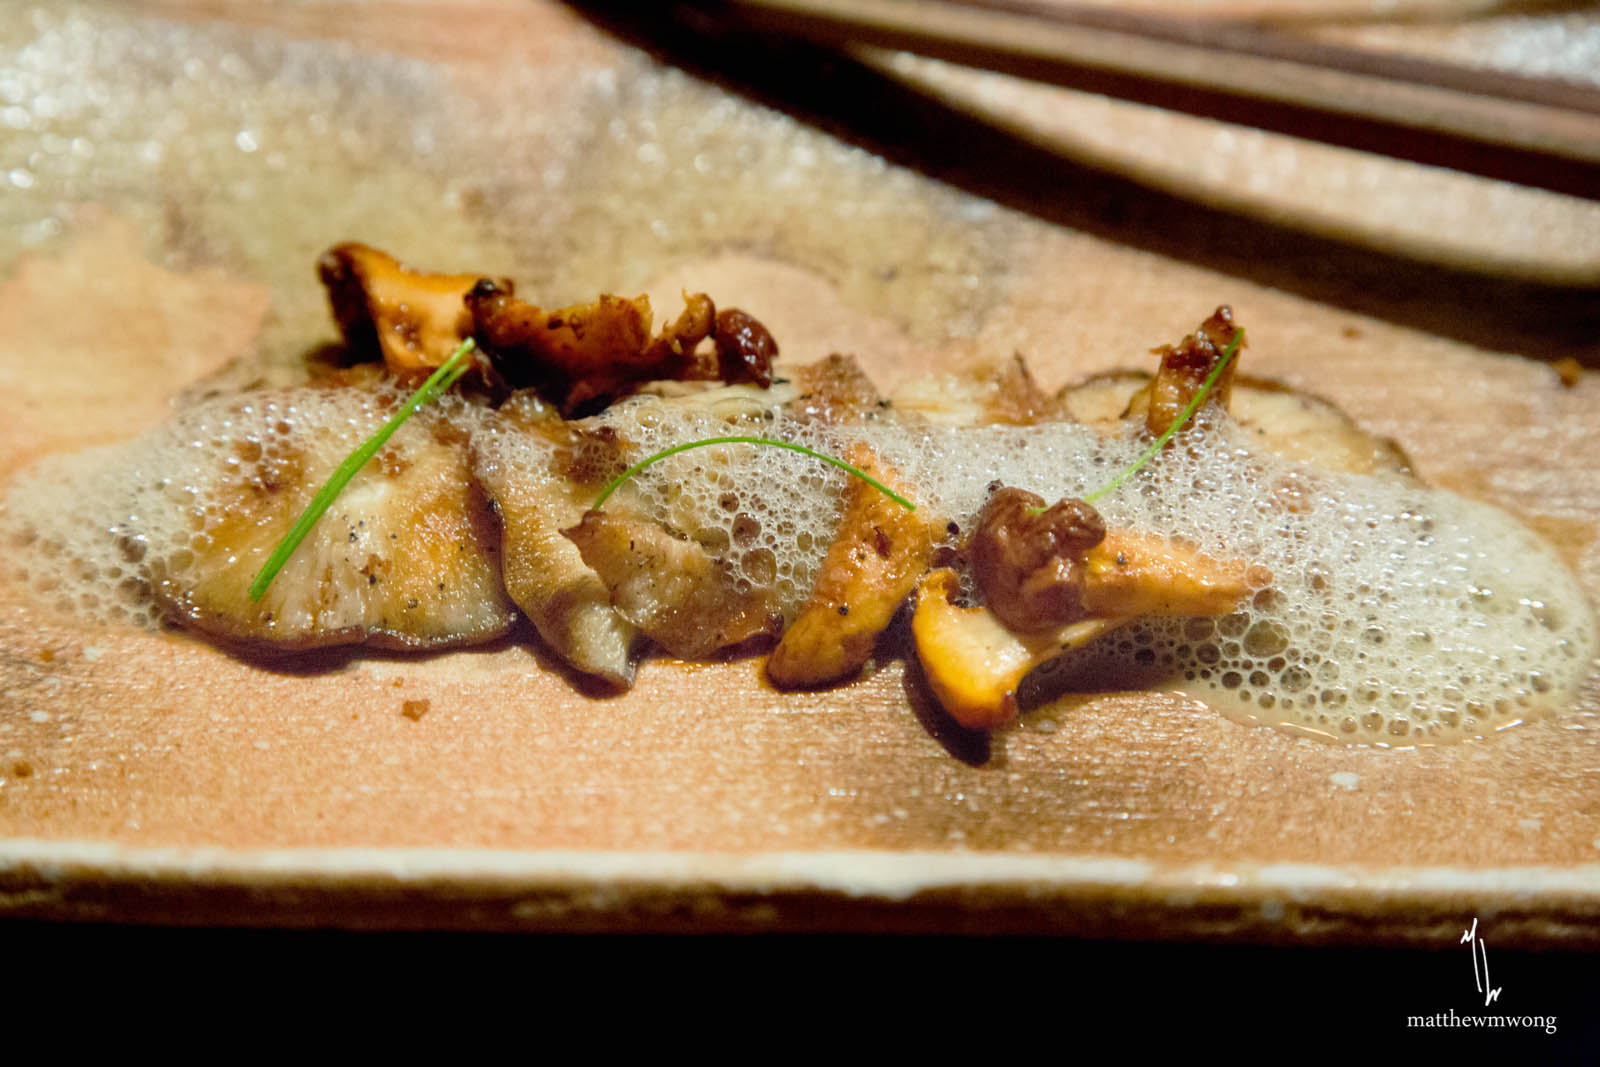 Grilled Chanterelle & Shiitake Mushrooms - rosemary garlic oil, sesame froth, soy